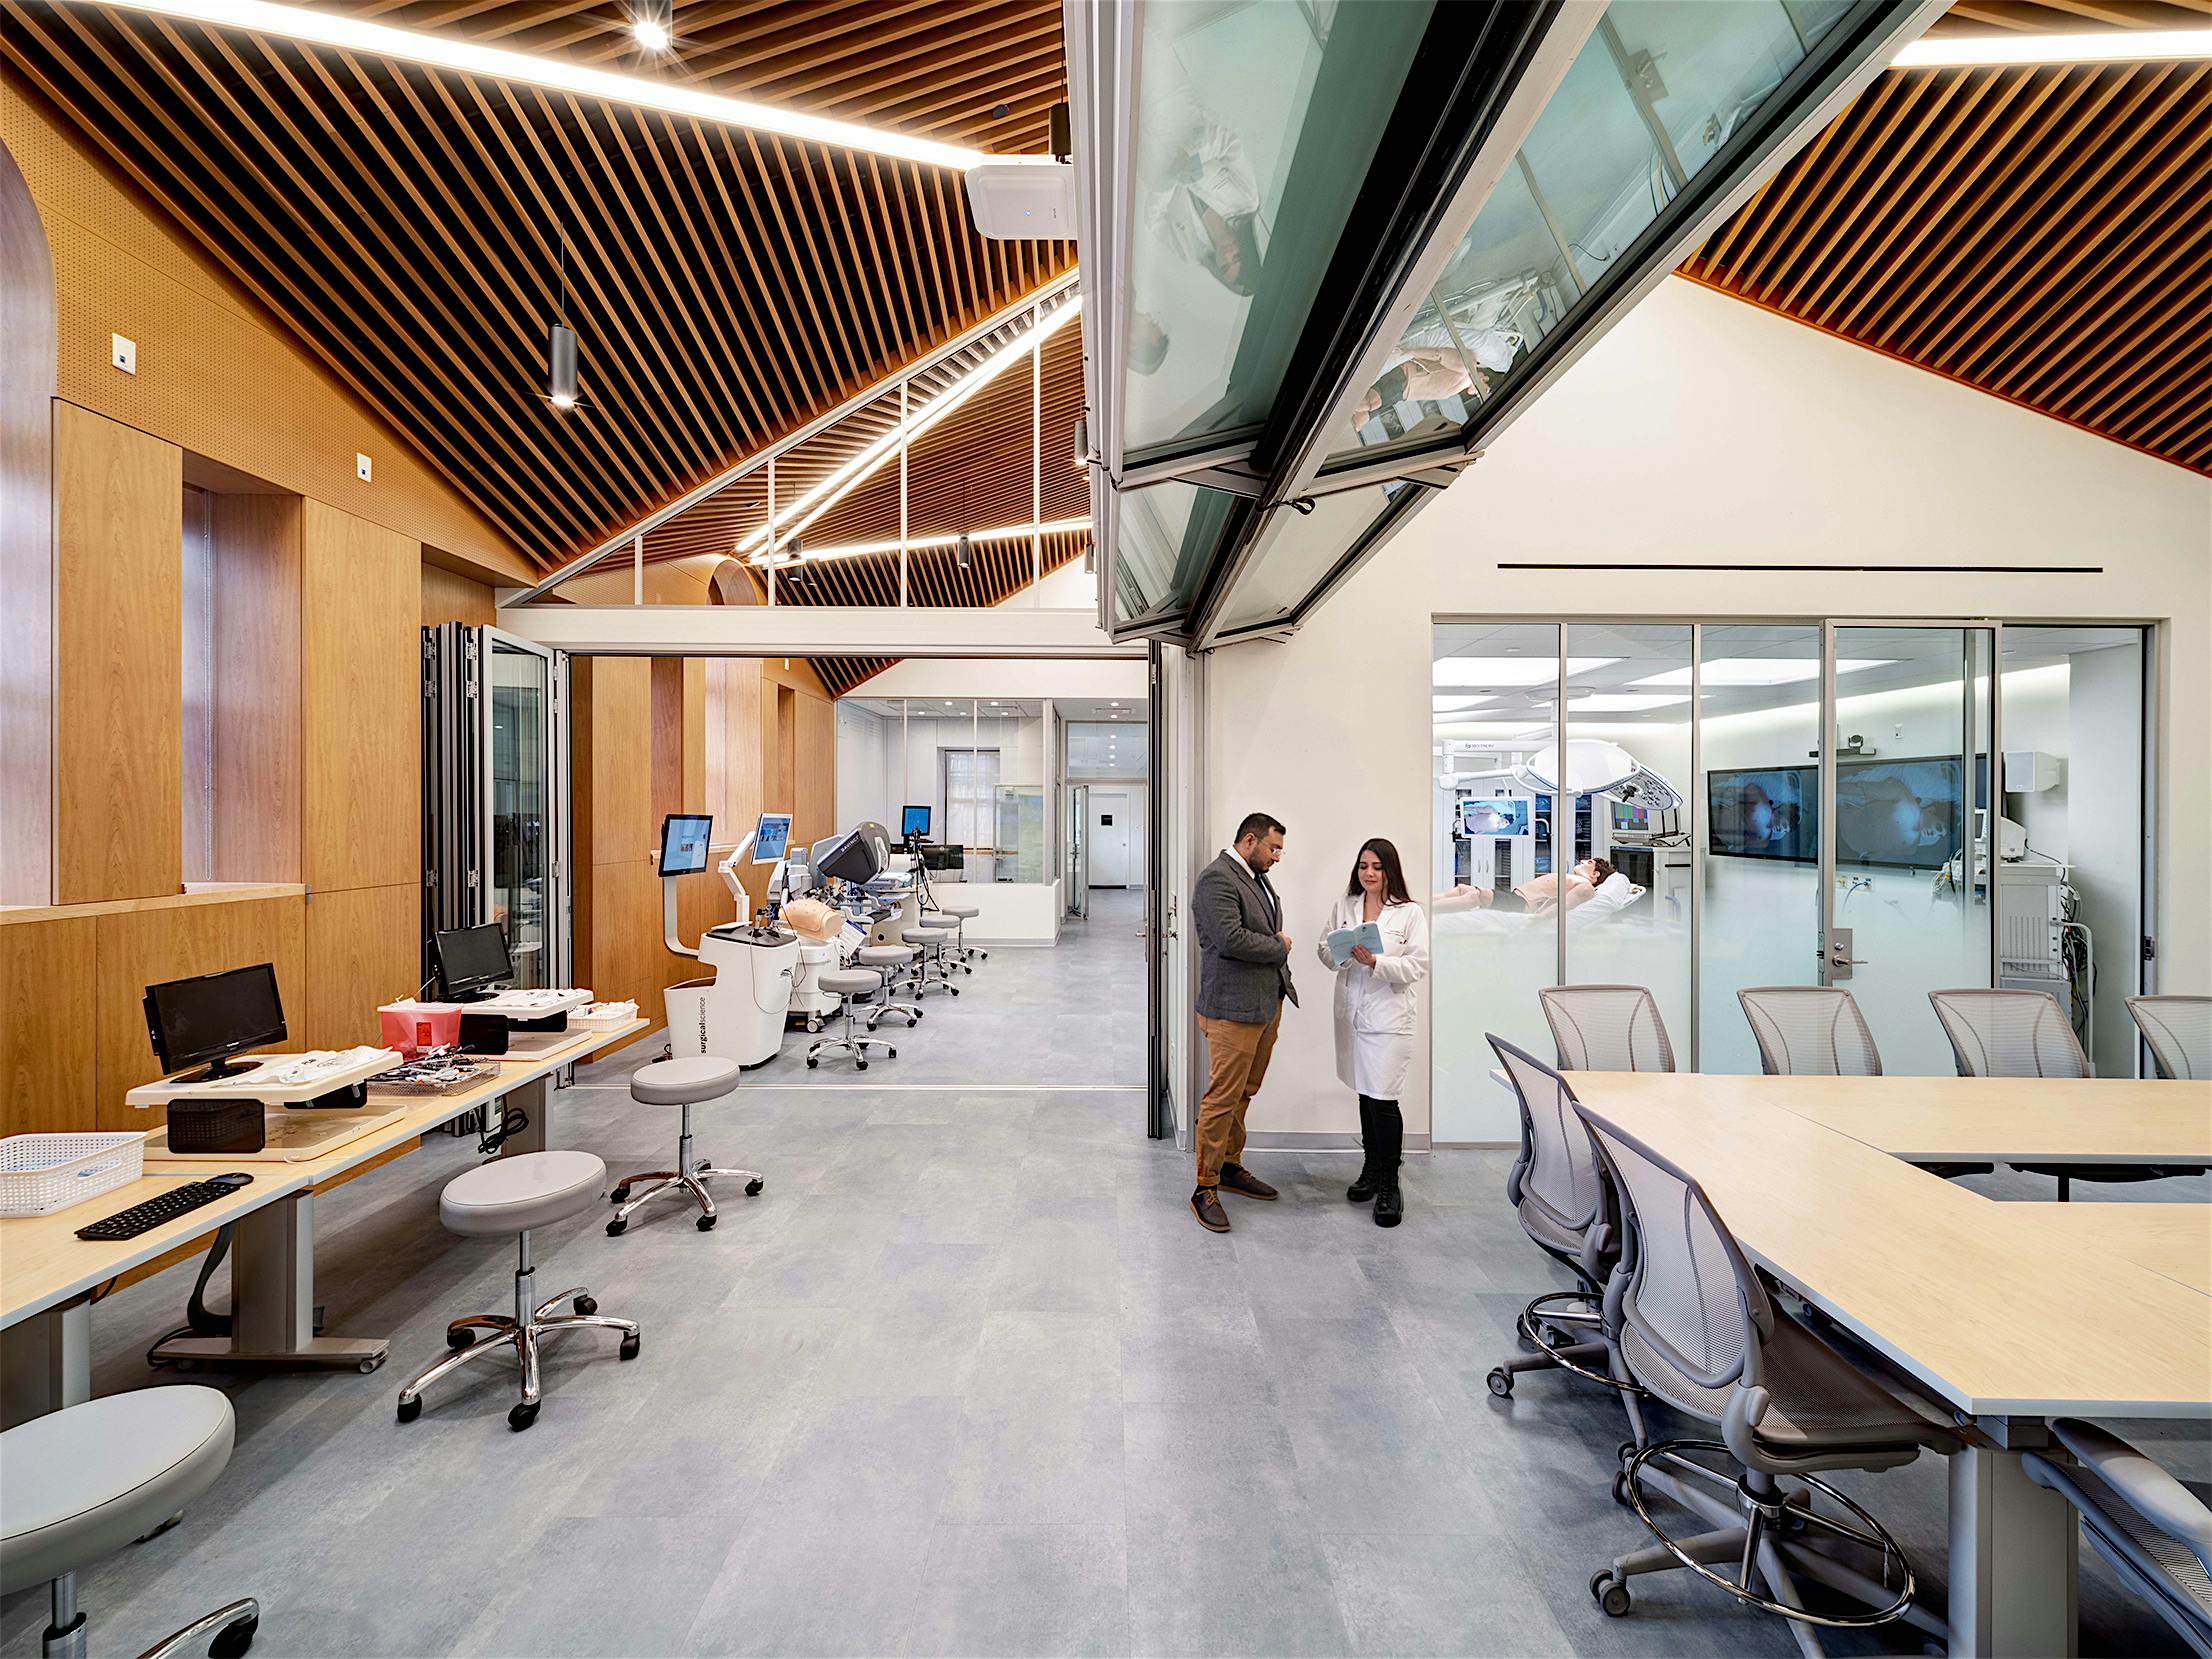 Mount Sinai learning facilities with opening glass wall